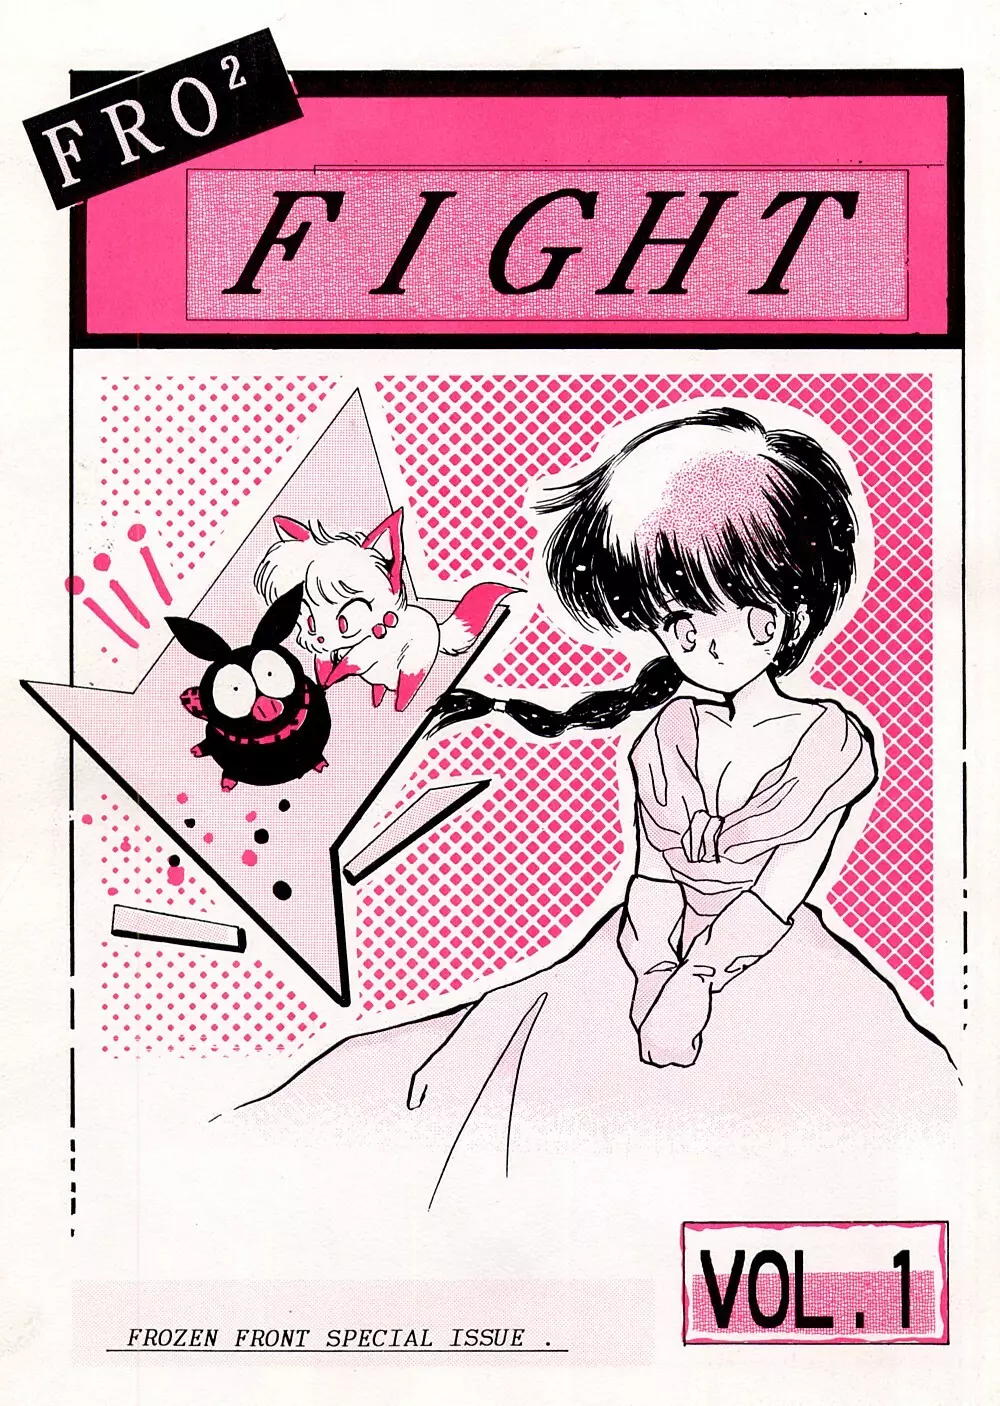 Fro2 Fight Vol. 1